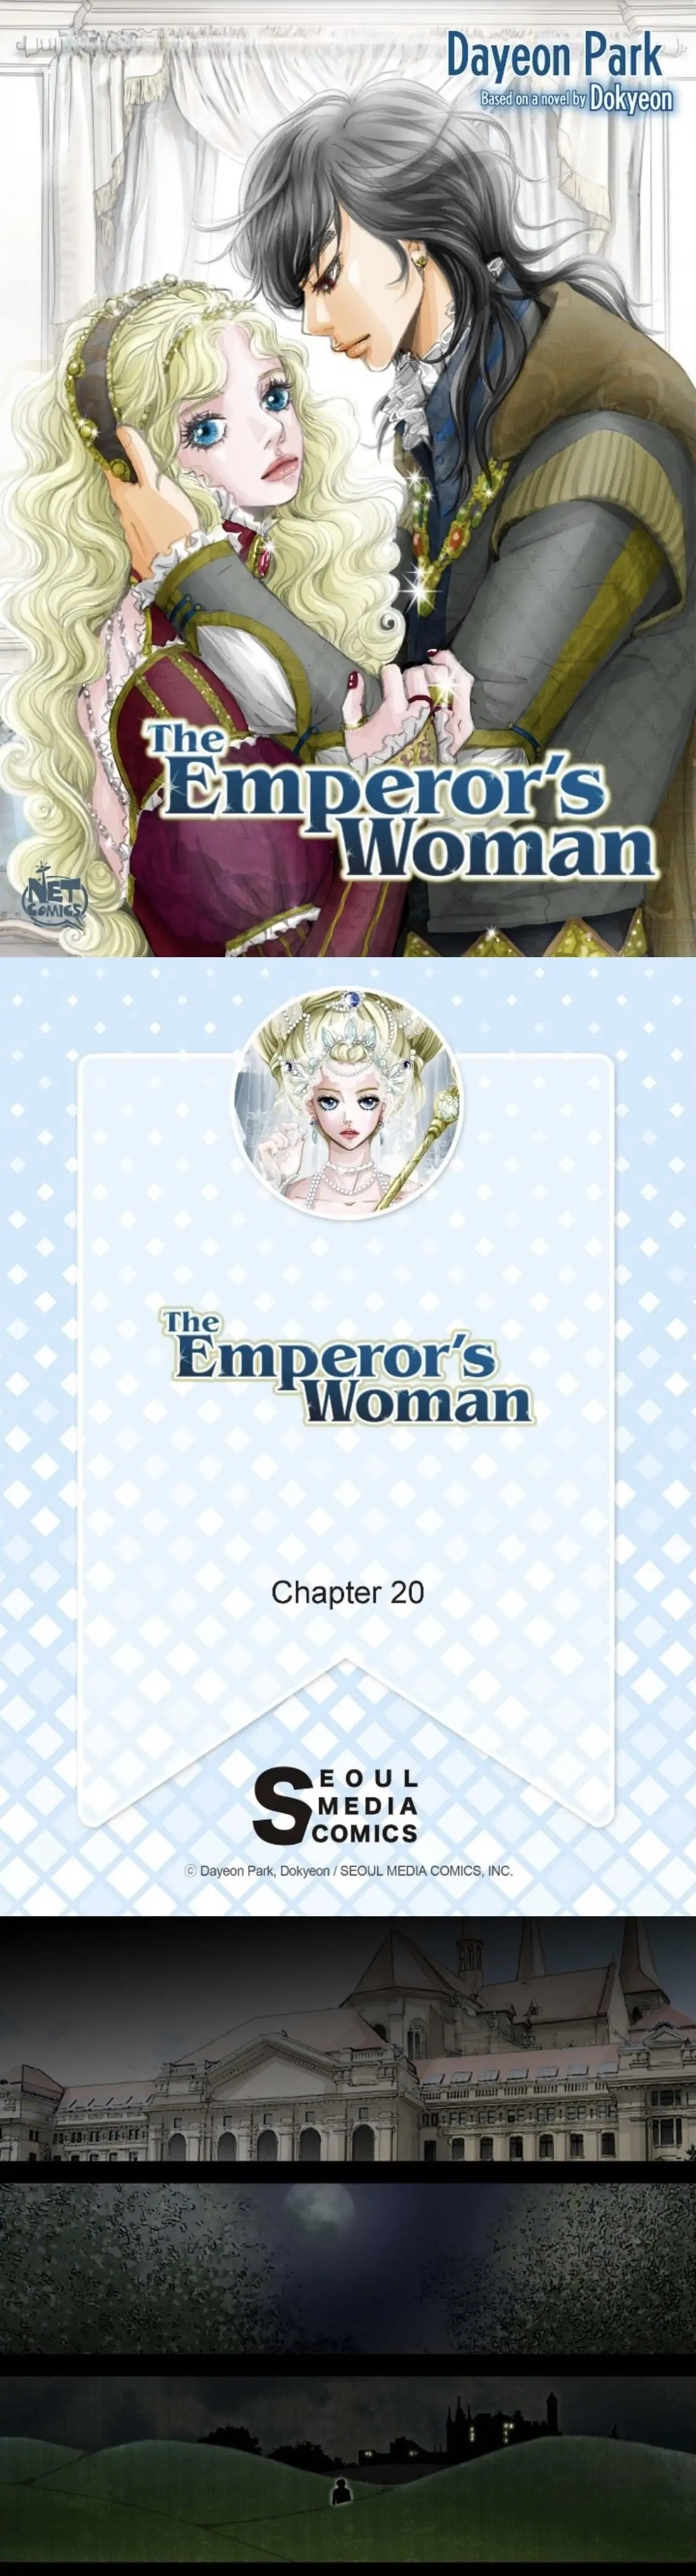 The Emperor’s Woman chapter 20